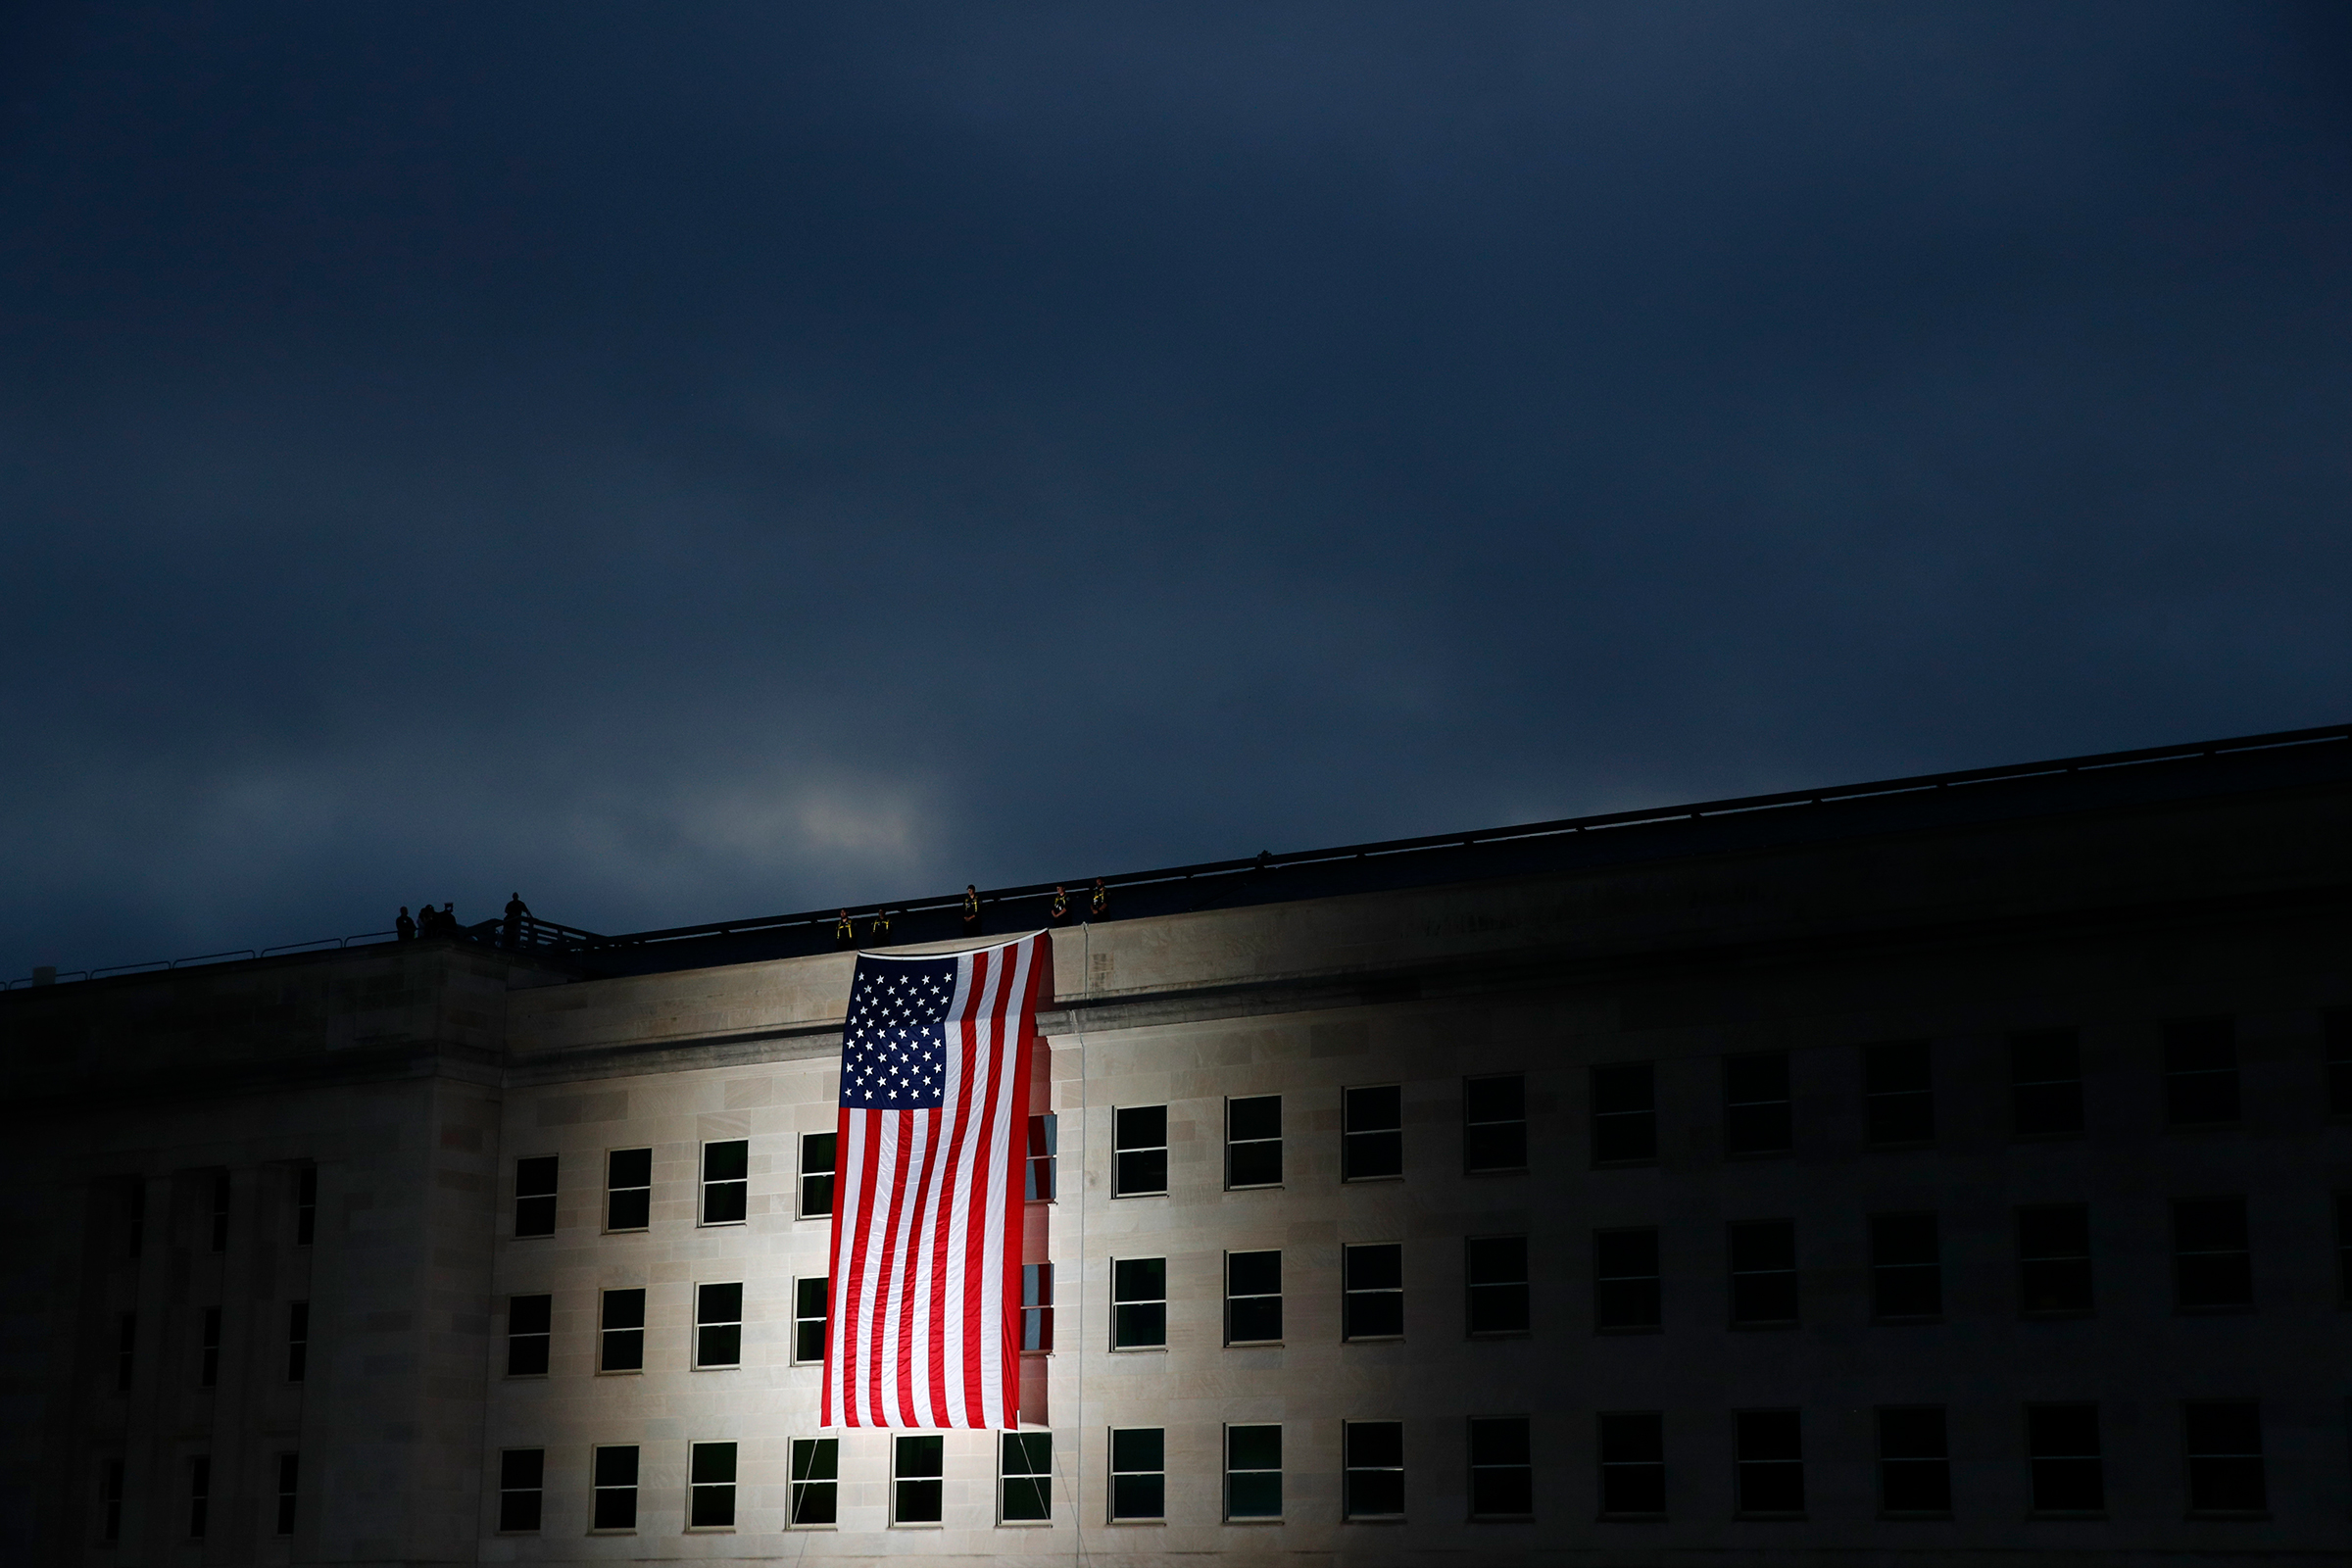 An American flag is unfurled at sunrise at the Pentagon in Washington, D.C., on Sept. 11, 2019, the 18th anniversary of the attacks. (Patrick Semansky—AP)